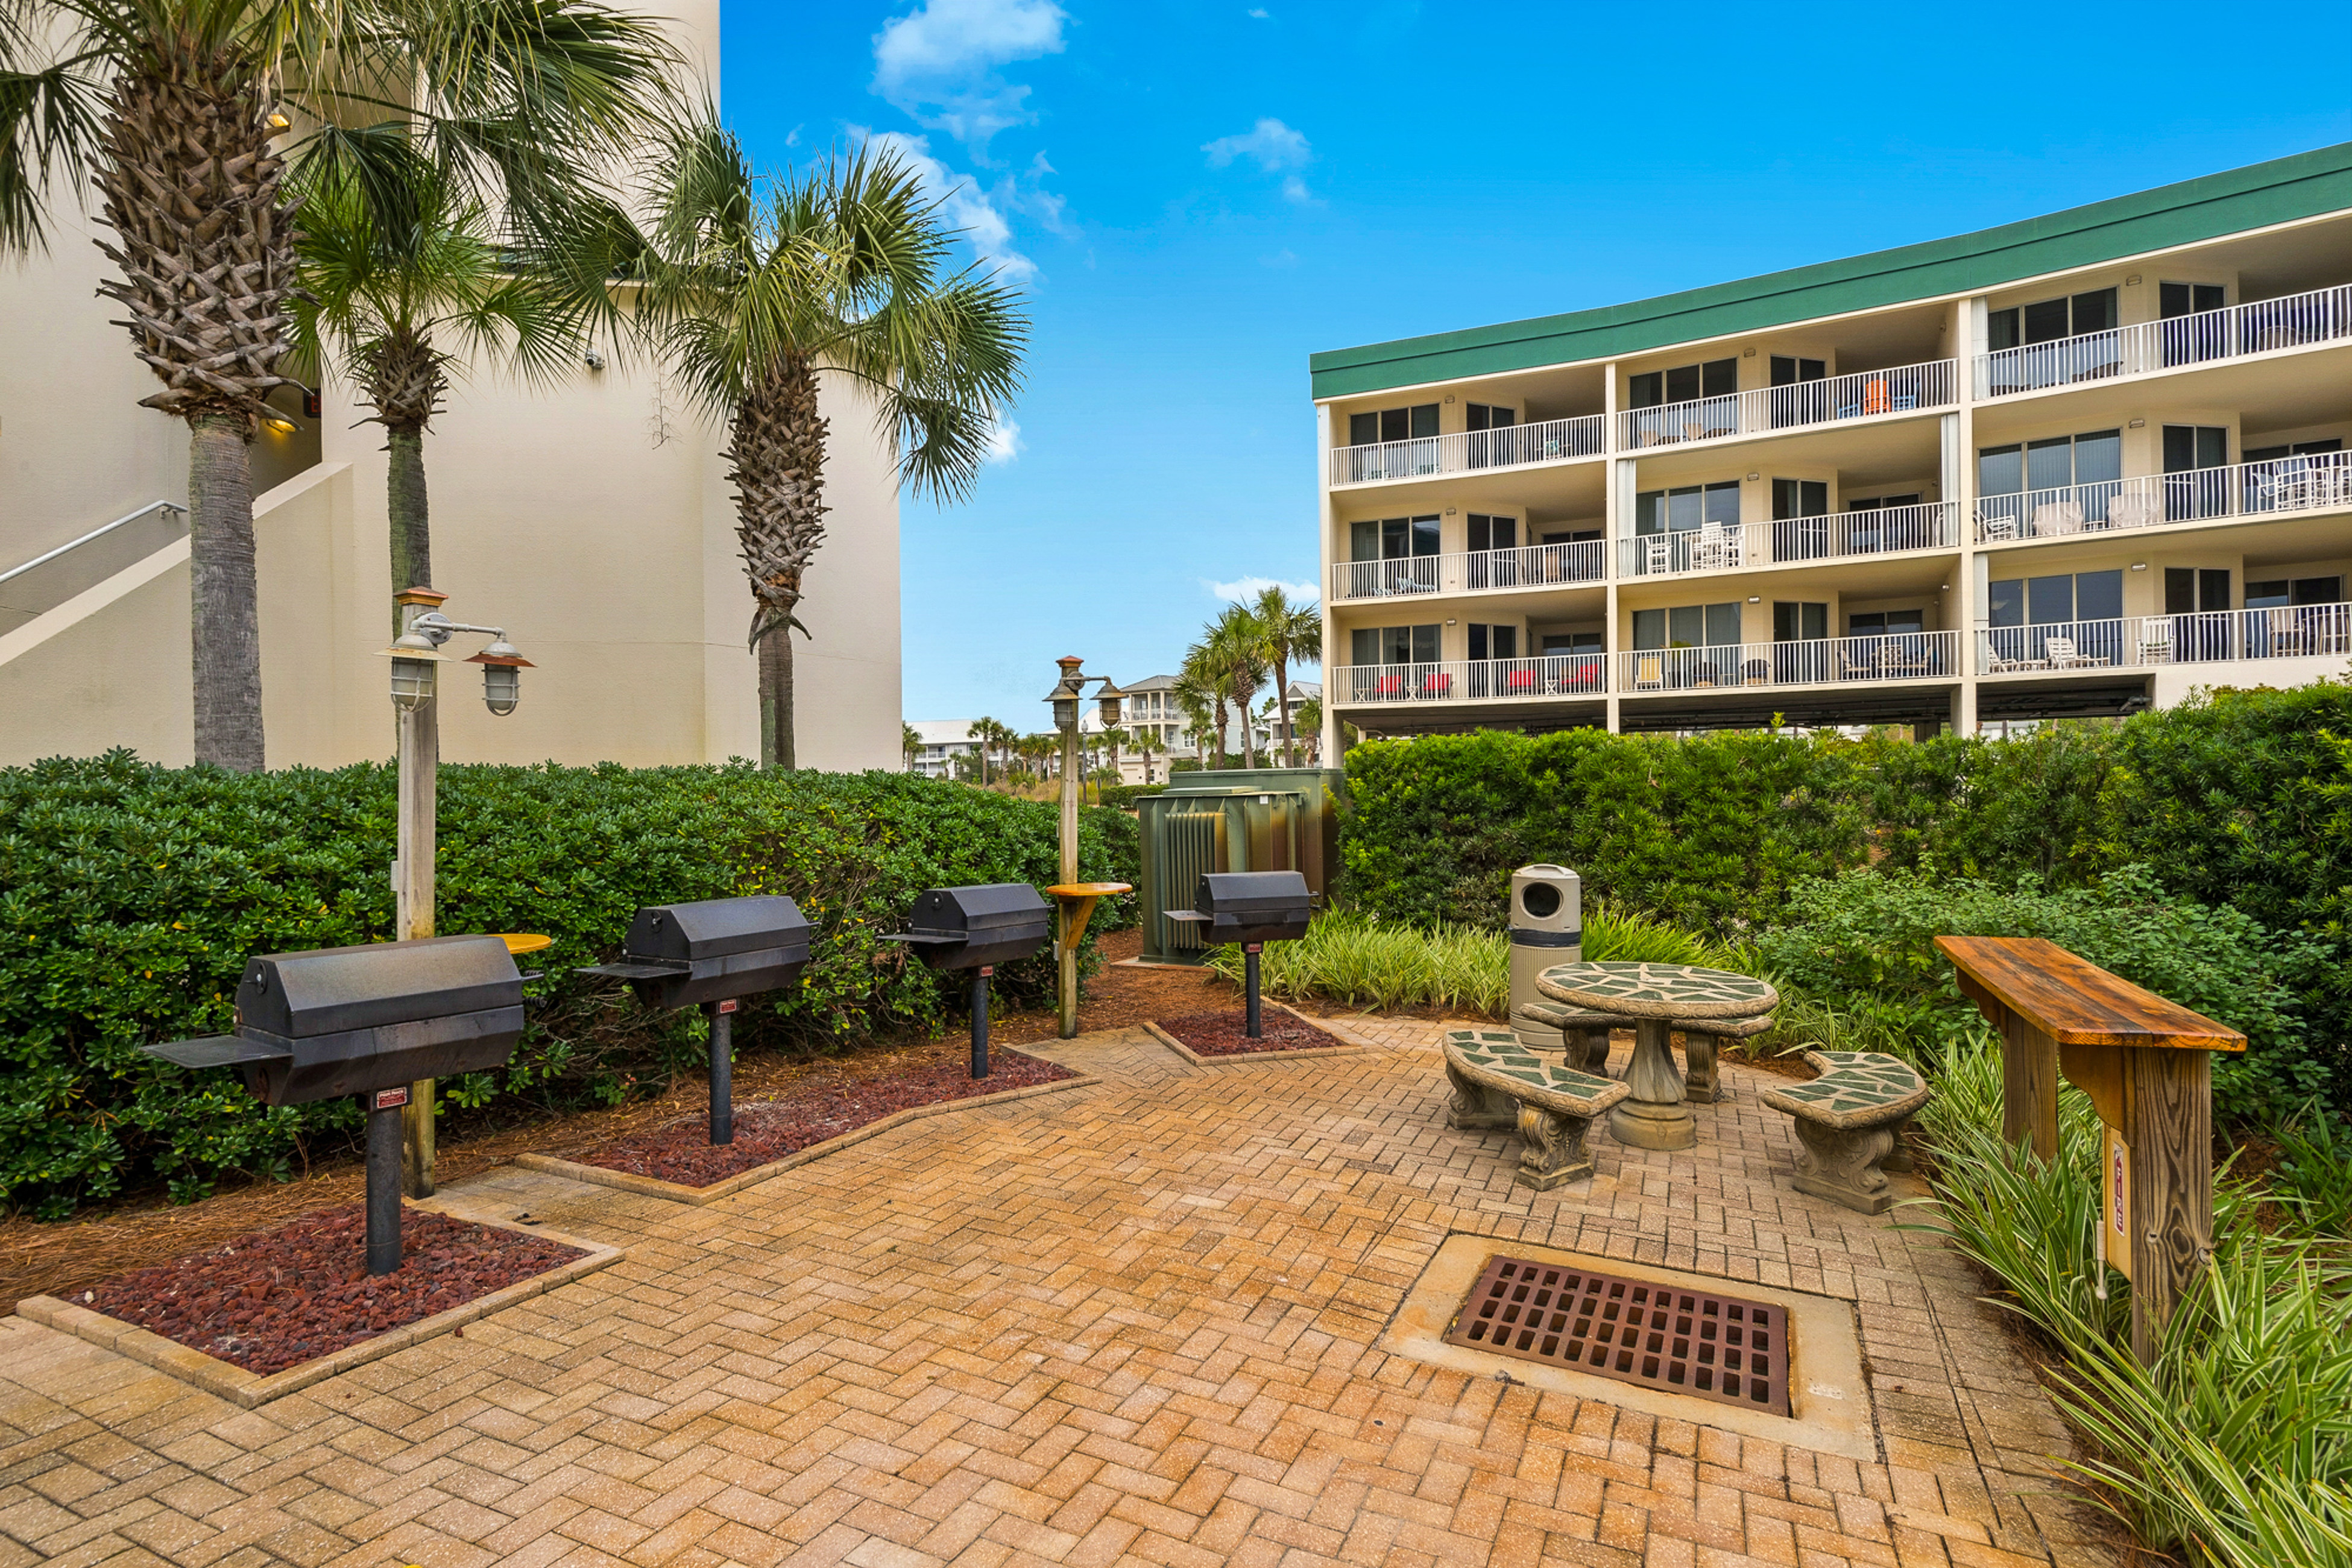 Dunes of Seagrove A206 Condo rental in Dunes of Seagrove in Highway 30-A Florida - #39